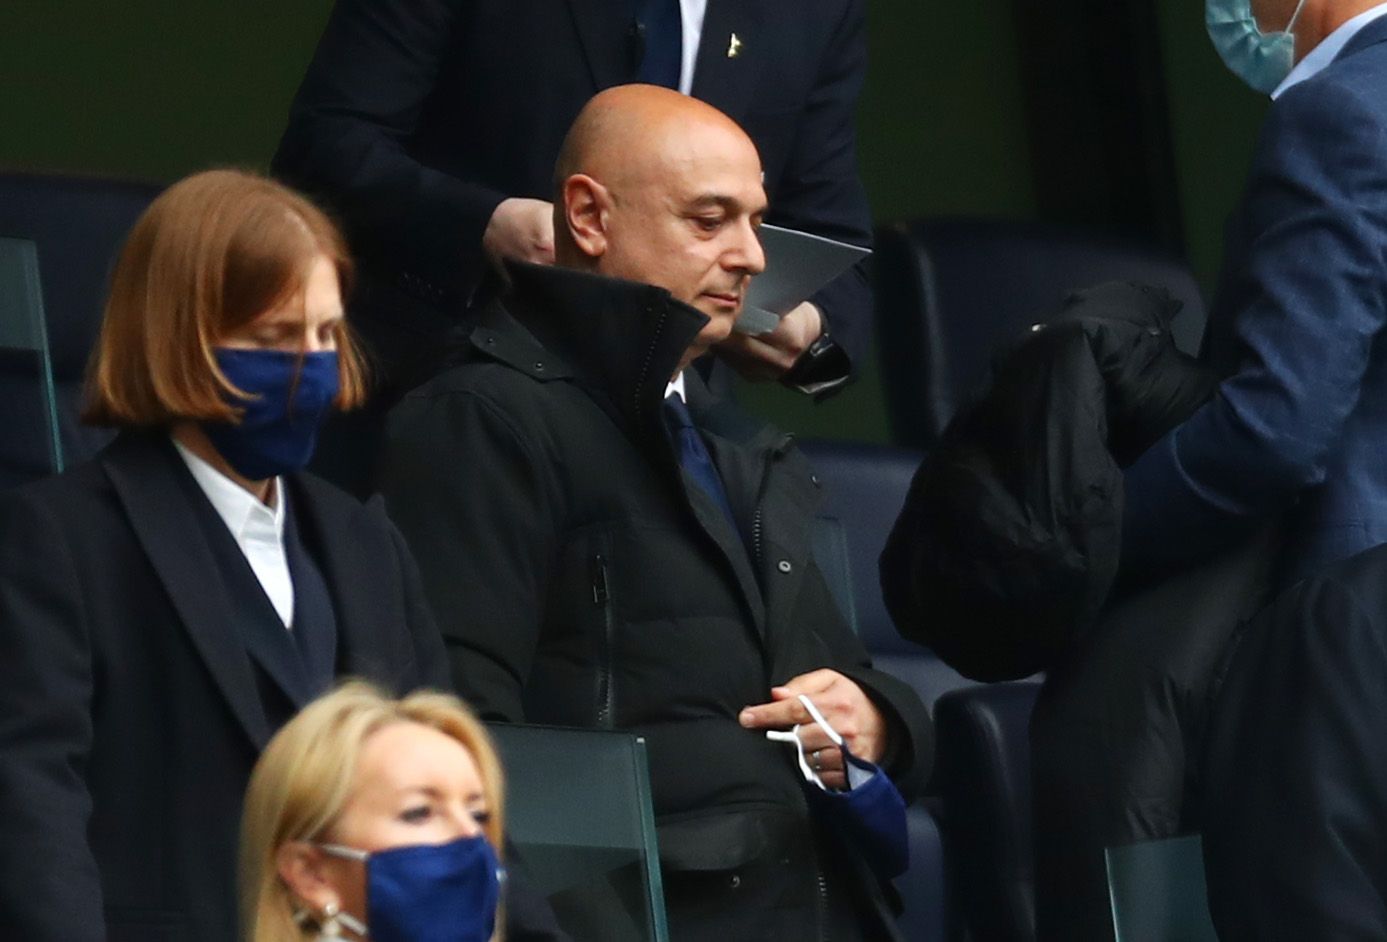 Tottenham Hotspur chairman Daniel Levy in the stands